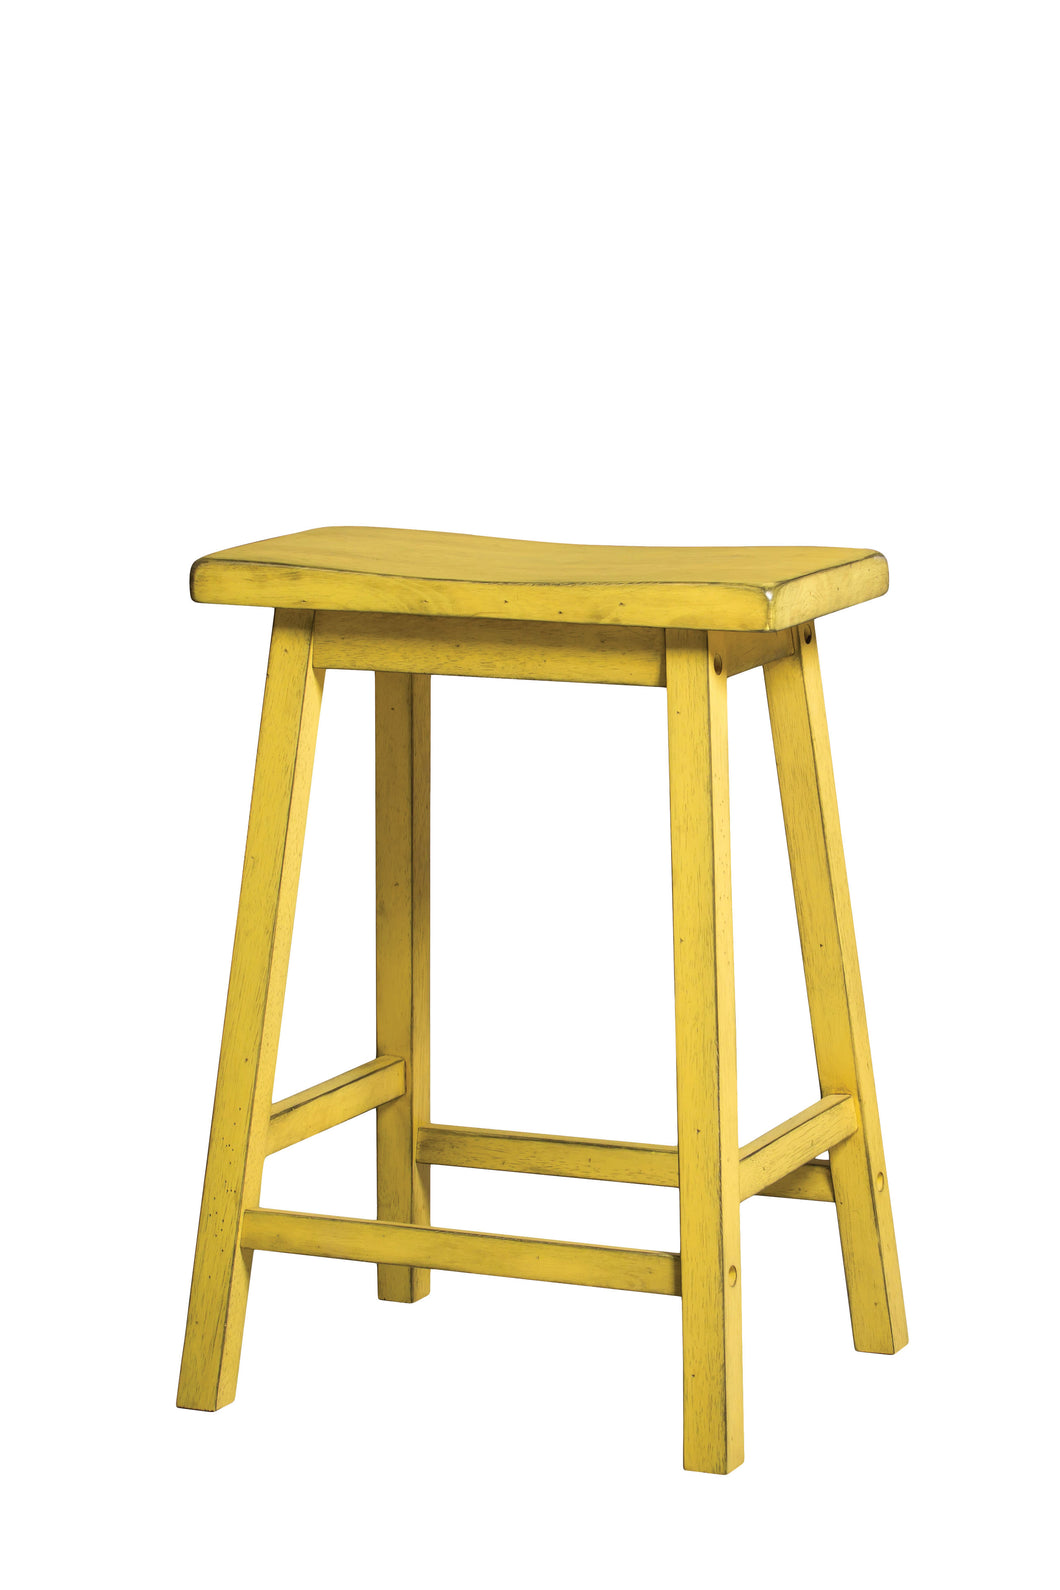 Gaucho Antique Yellow Counter Height Stool